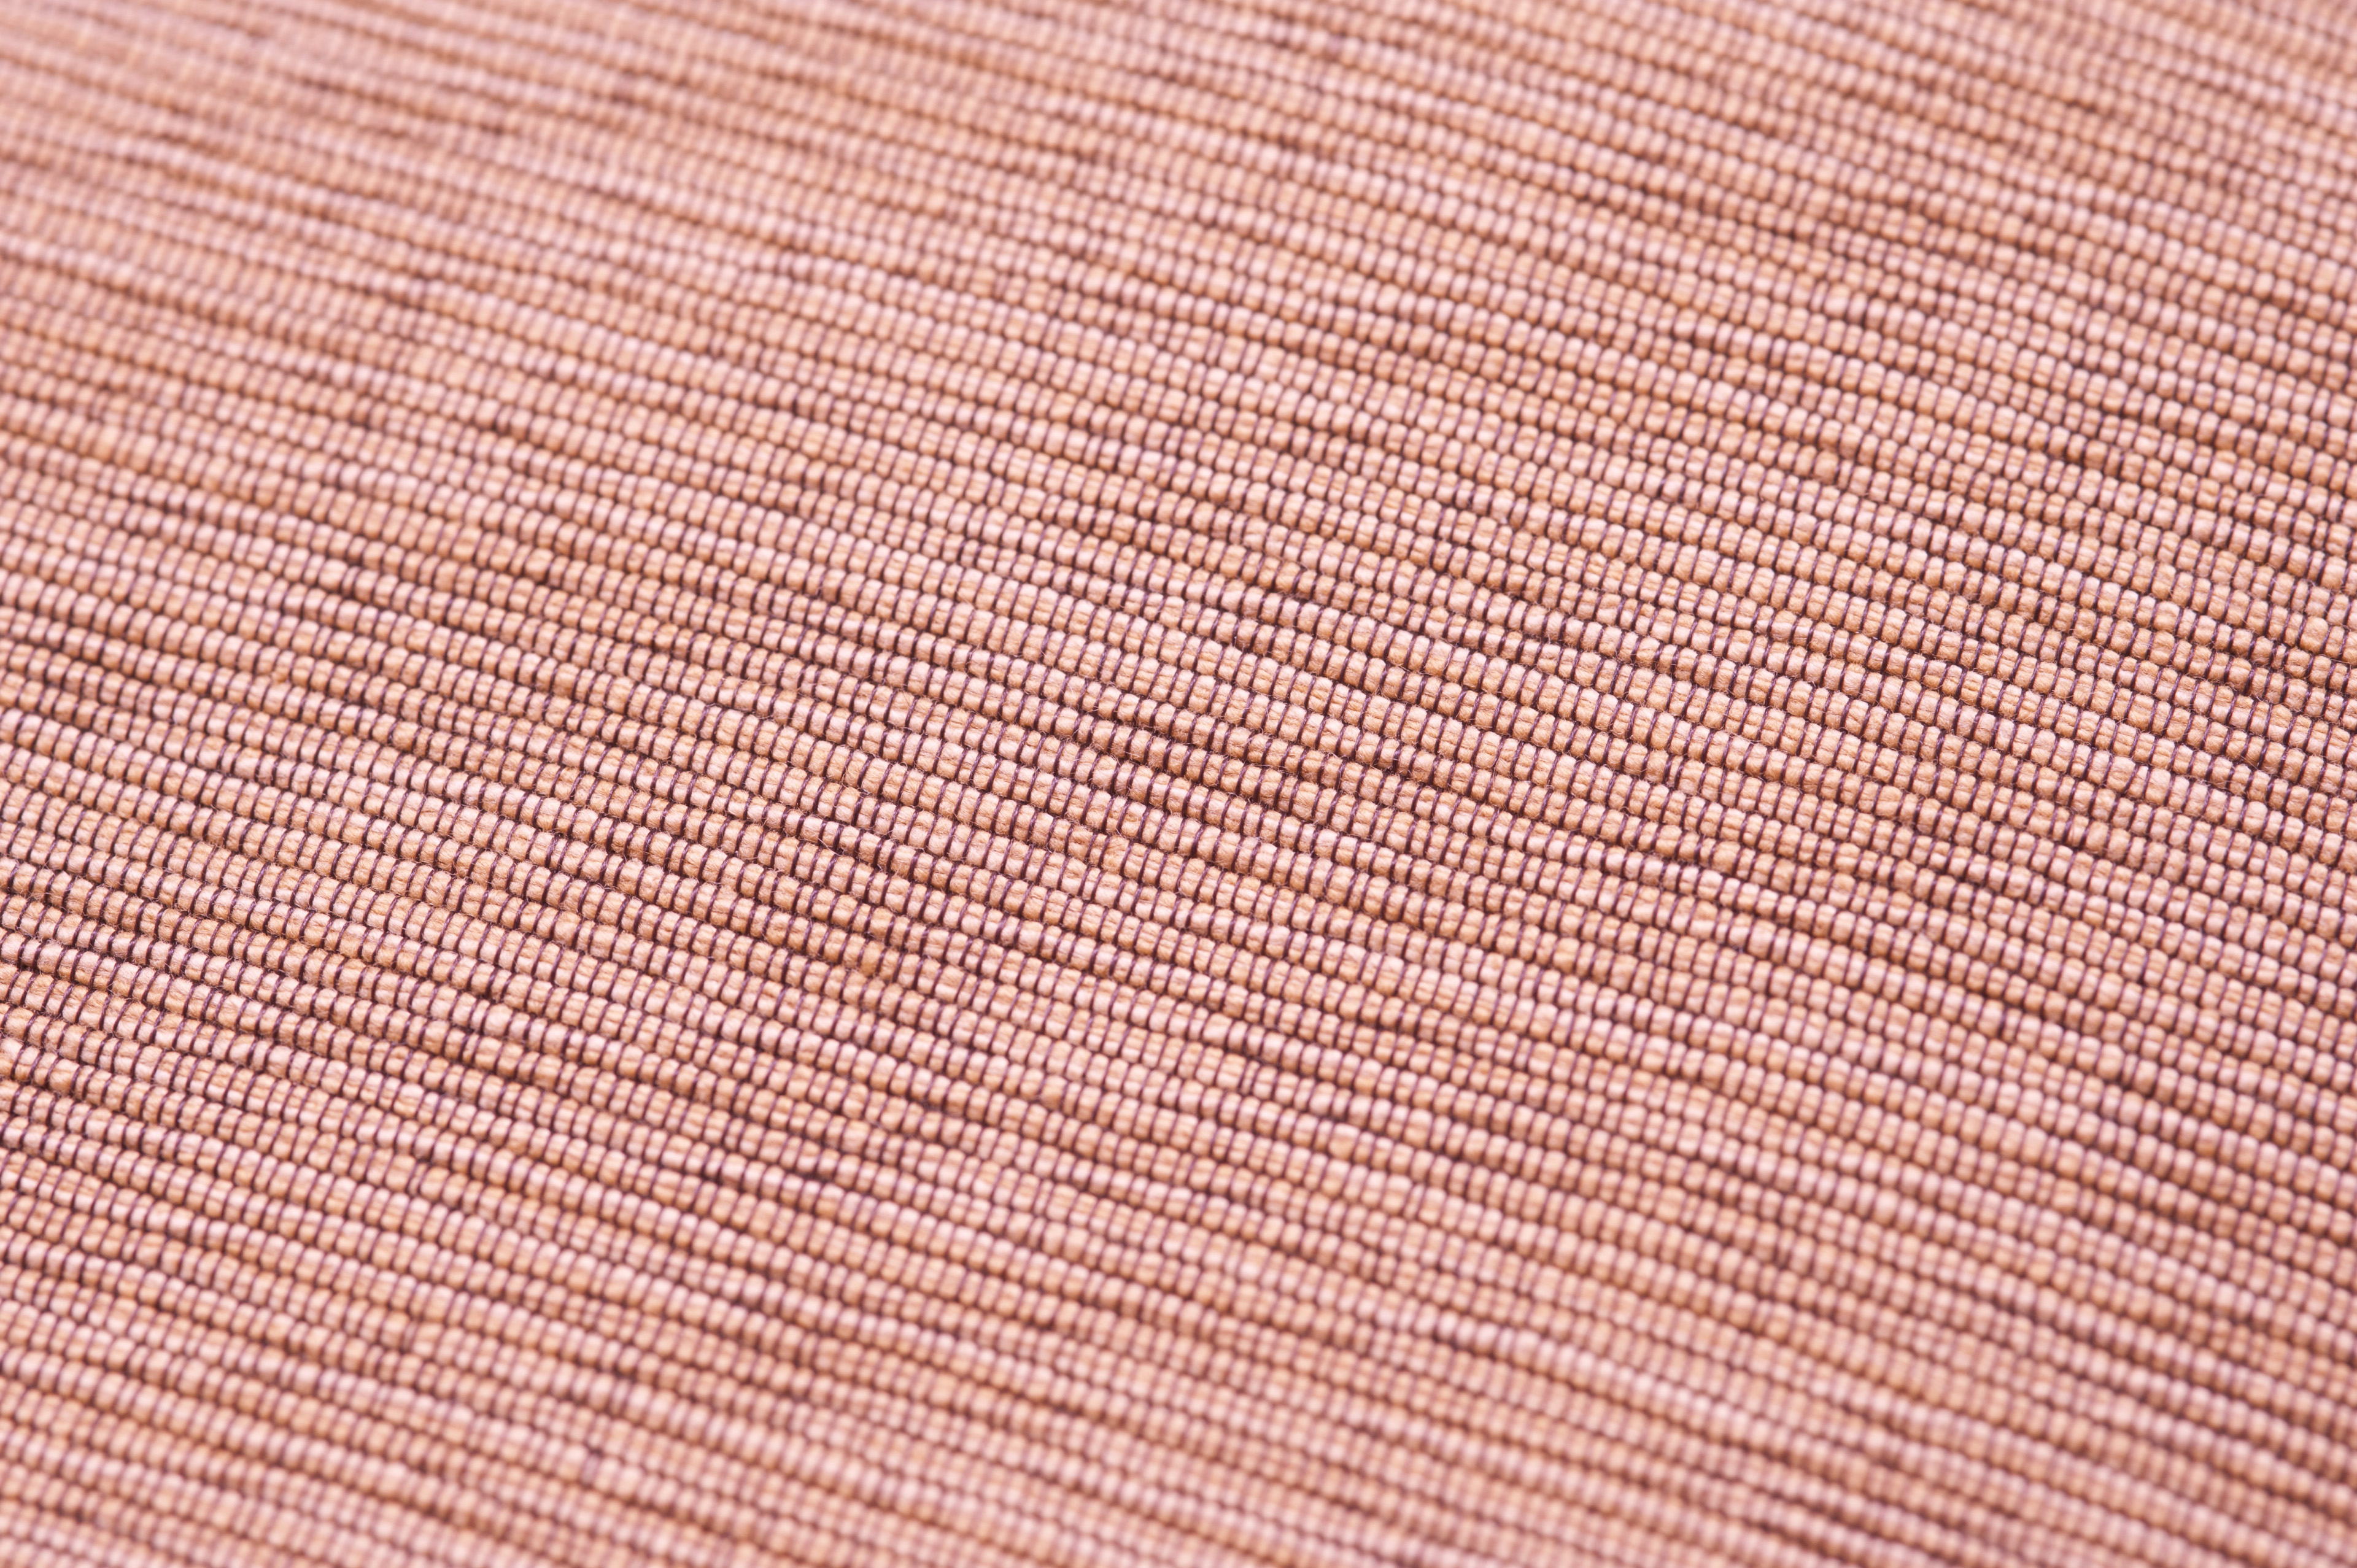 Image of Detail of Woven Pink Fabric | Freebie.Photography